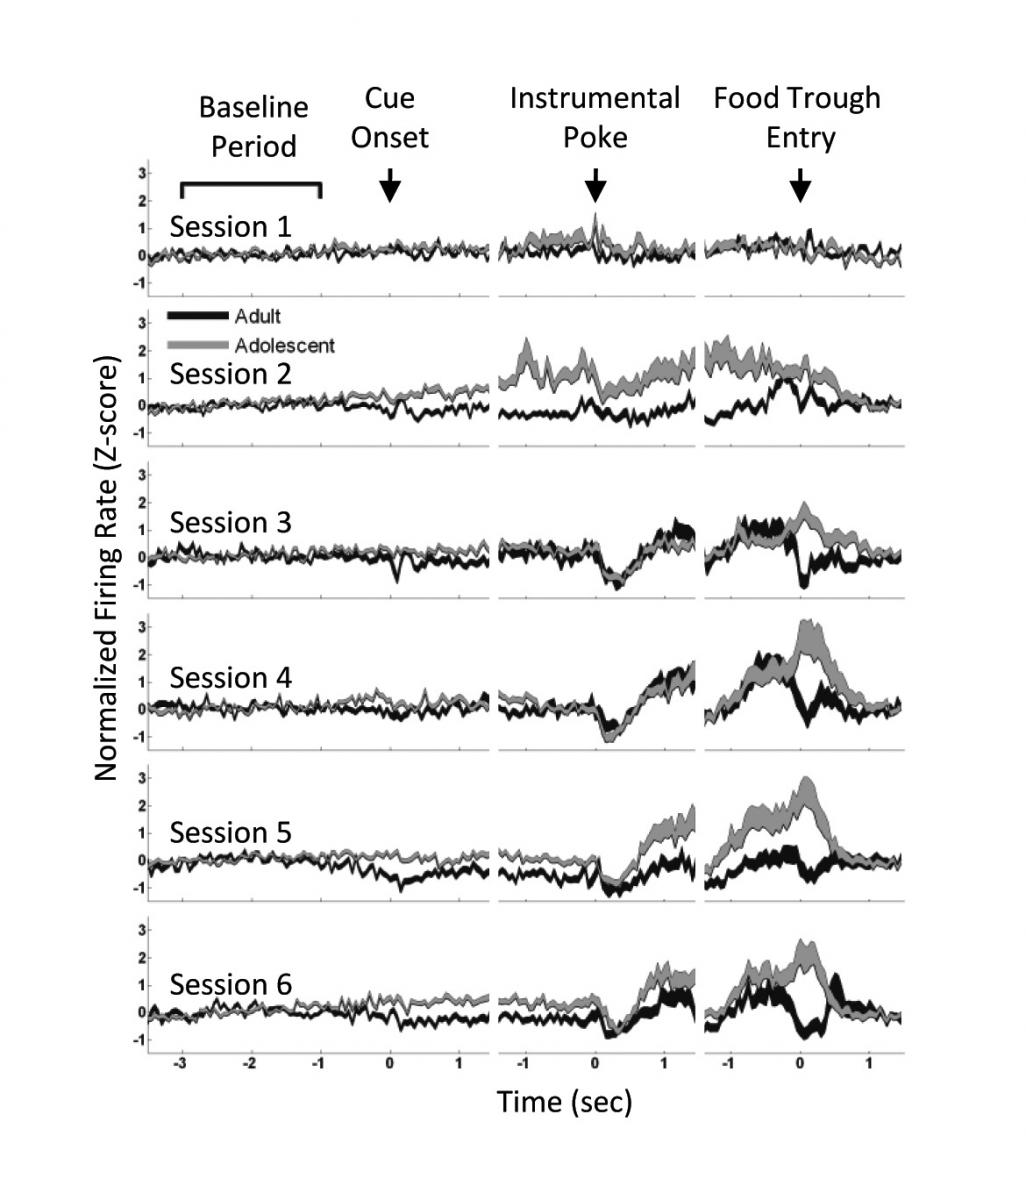 Adult and adolescent neural activity was similar at first. When a reward was expected (sessions 3-6), adolescent brain activity spiked, followed by a slow decrease after the sugar pellet was received (food trough entry). Adults experienced a similar rapid increase in activity followed by a quick return to baseline.